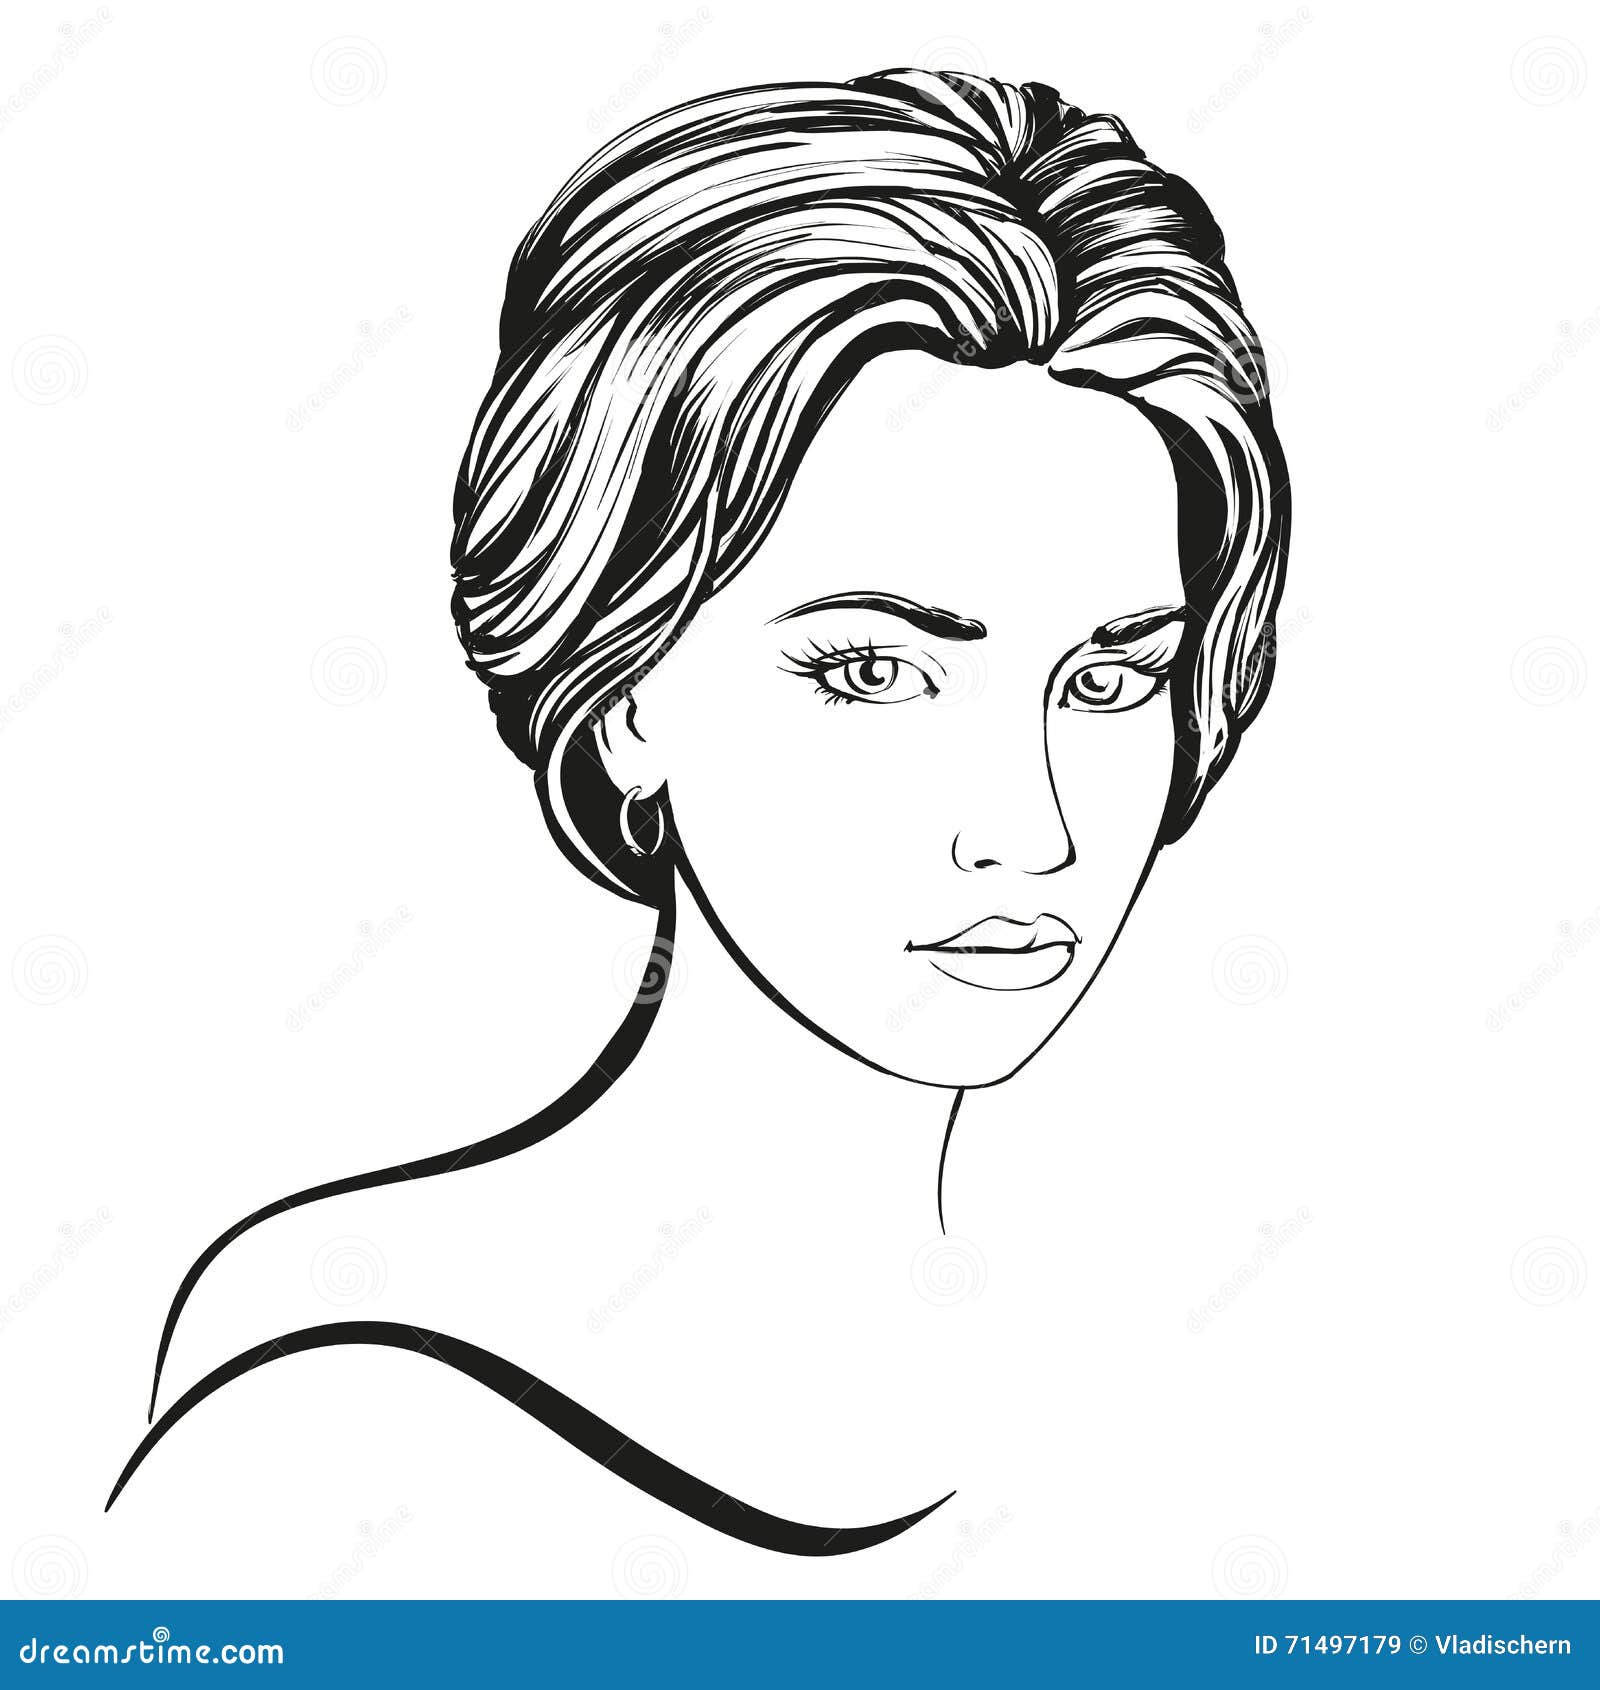 How to Draw a Face in Basic Proportions - Drawing Beautiful Female Face  Tutorial - How to Draw Step by Step Drawing Tutorials